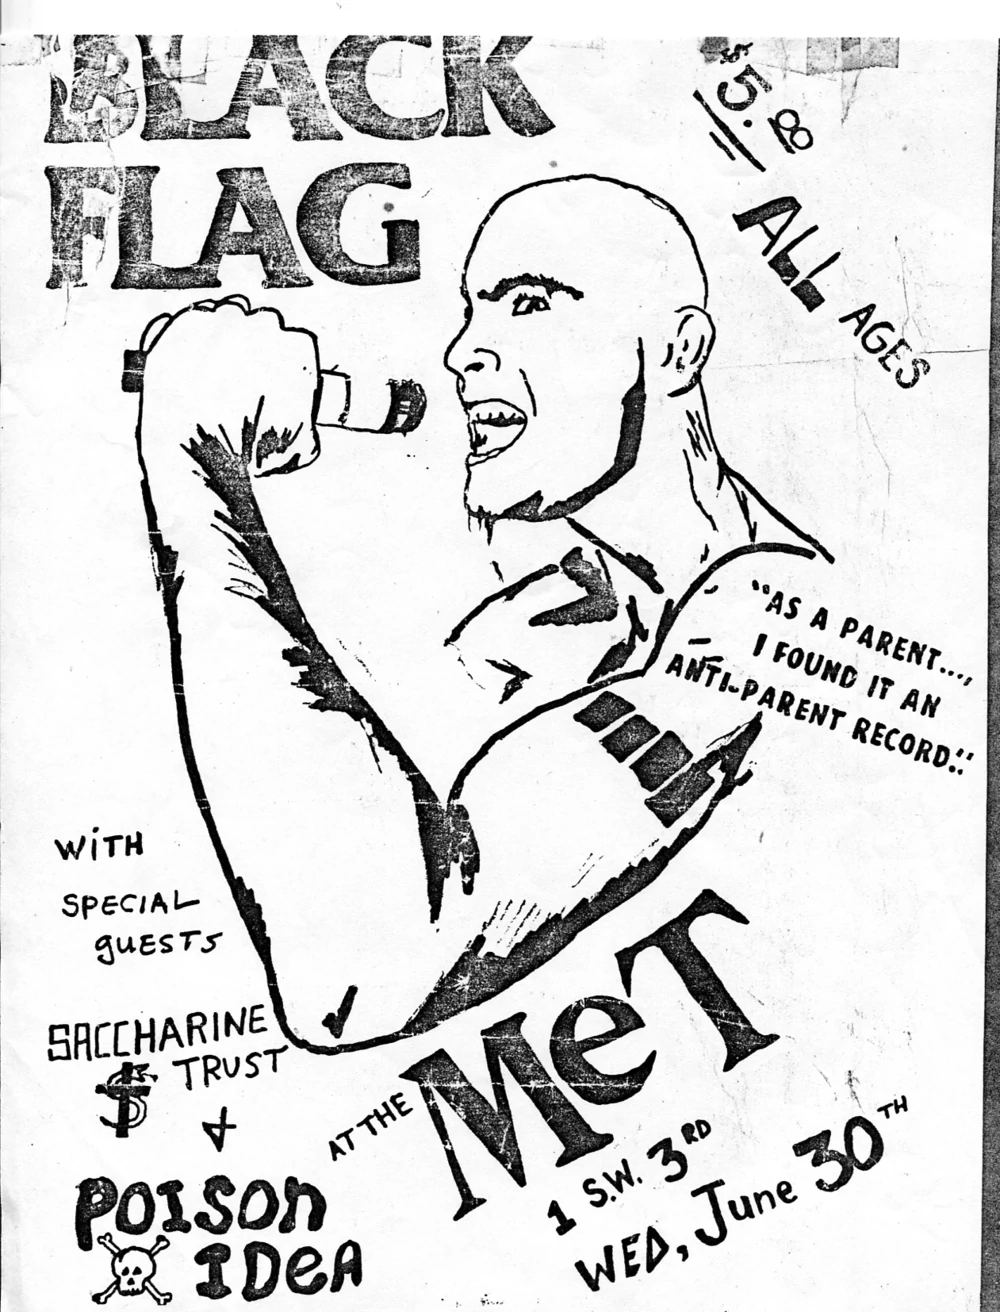 Alternative poster for June 30 1982 Met show with sketch of Henry Rollins does not include Napalm Beach 